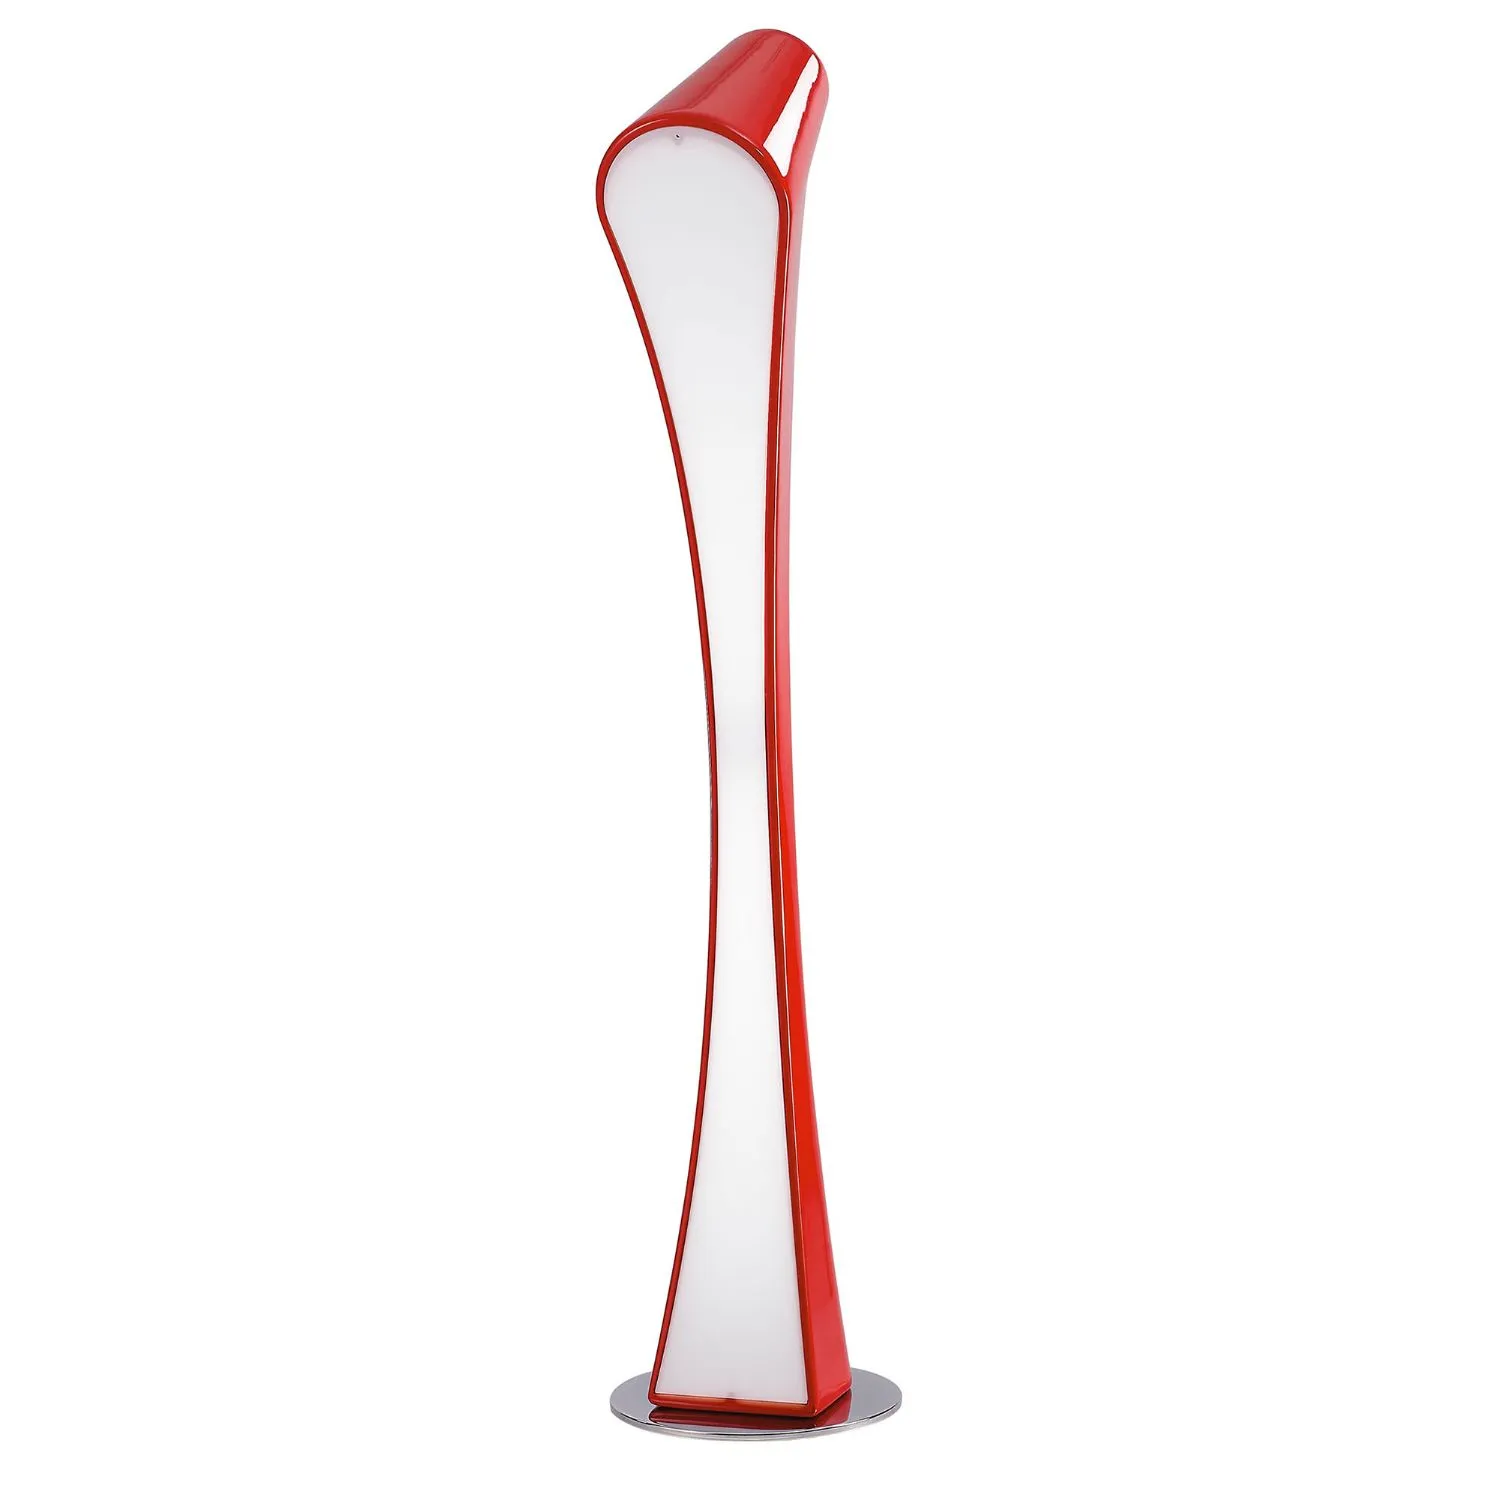 Ora Floor Lamp 2 Light T5, Gloss Red White Acrylic Polished Chrome COLLECTION ONLY, NOT LED CFL Compatible